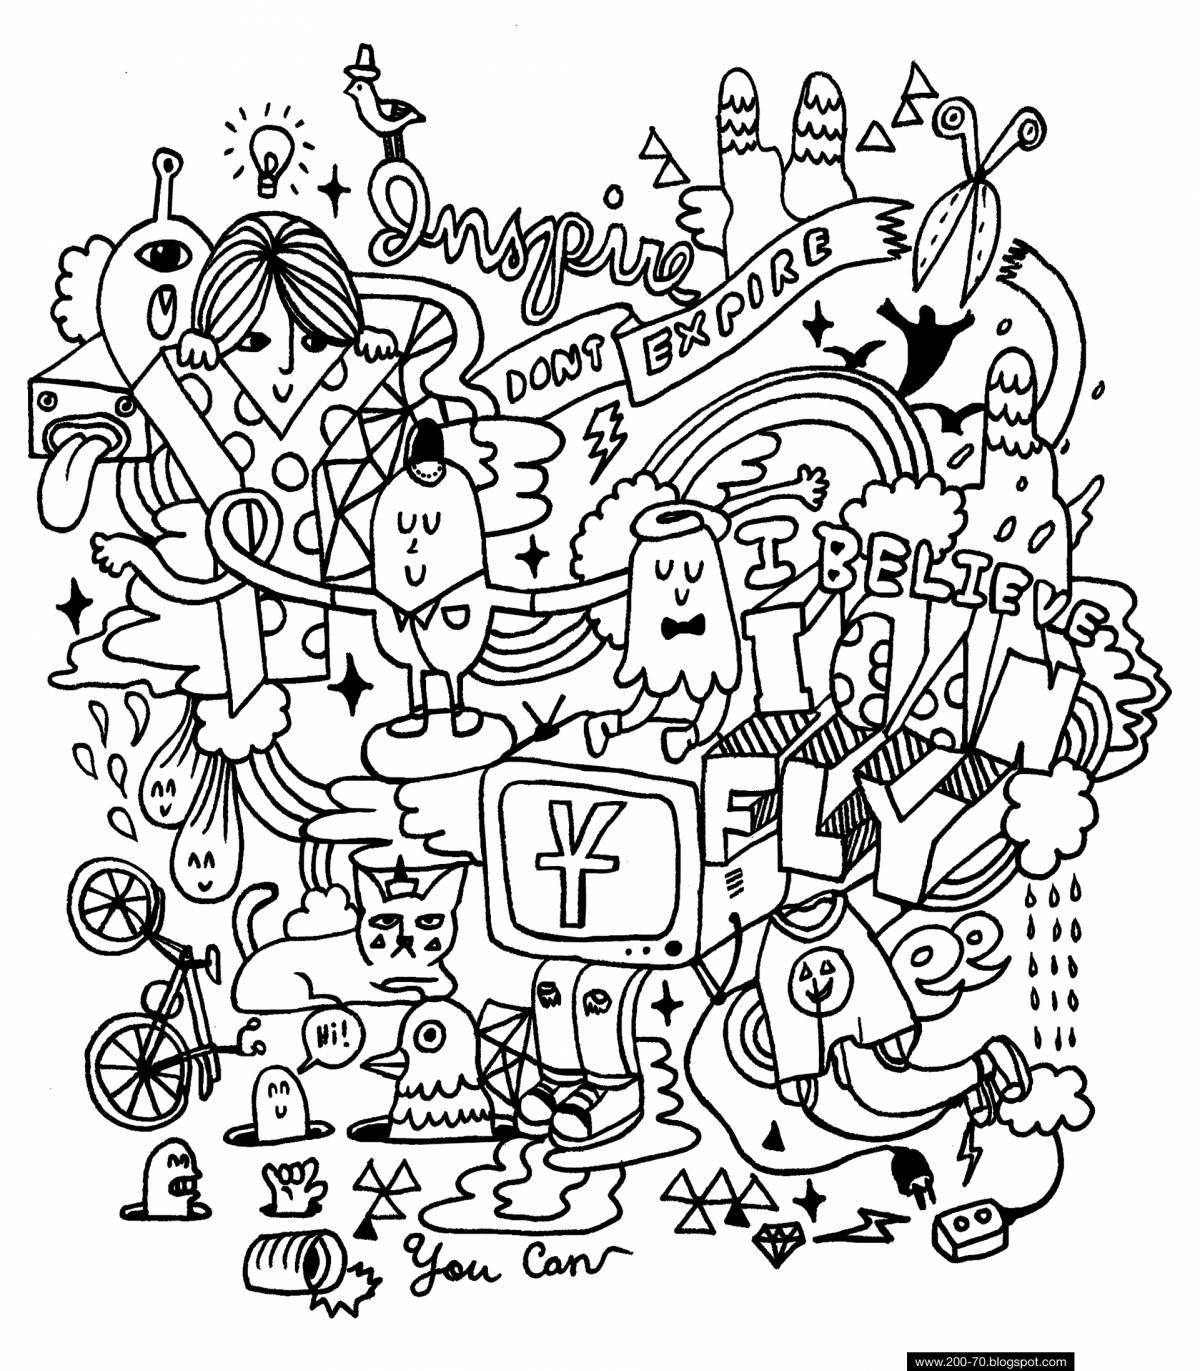 Fairy tale coloring page elements